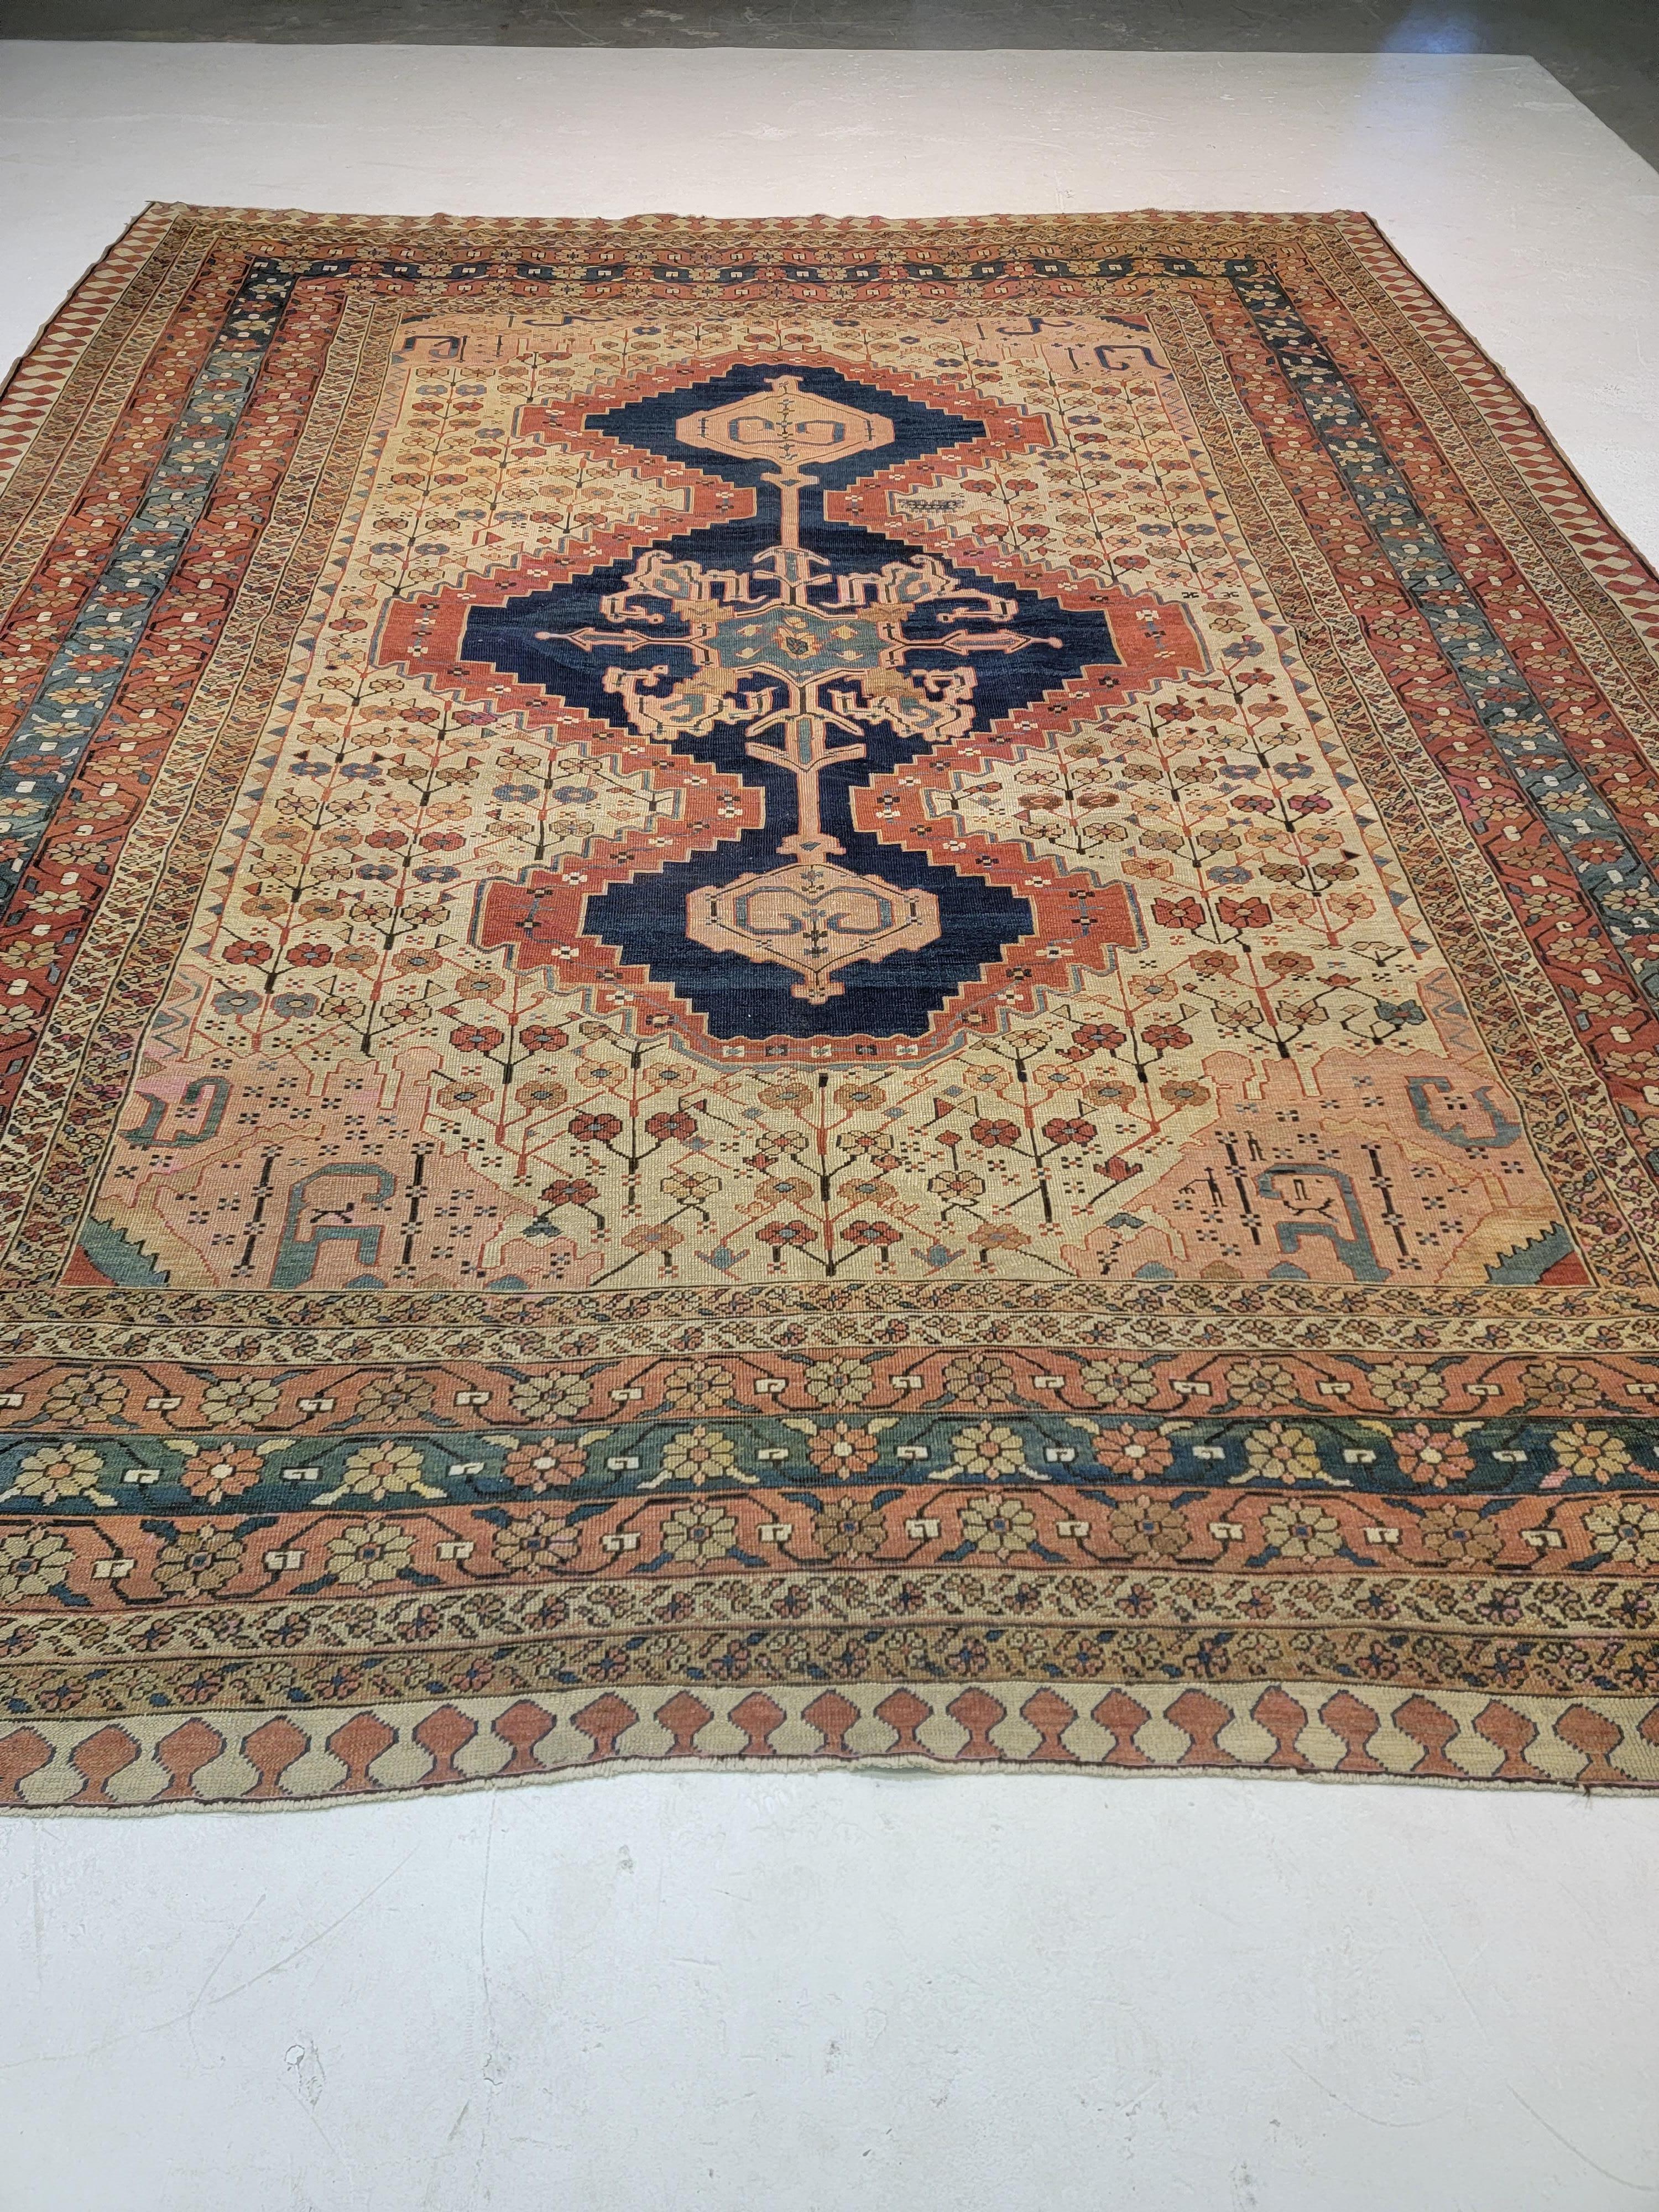 Absolutely rare original in all aspects and details.
130 year Persian Serapi Geo Floral Rug with an Ivory background and 3 Medallions. 
Age apparent patina, well distributed different color percentages of the whole, no dominant color.

Size: 11'6